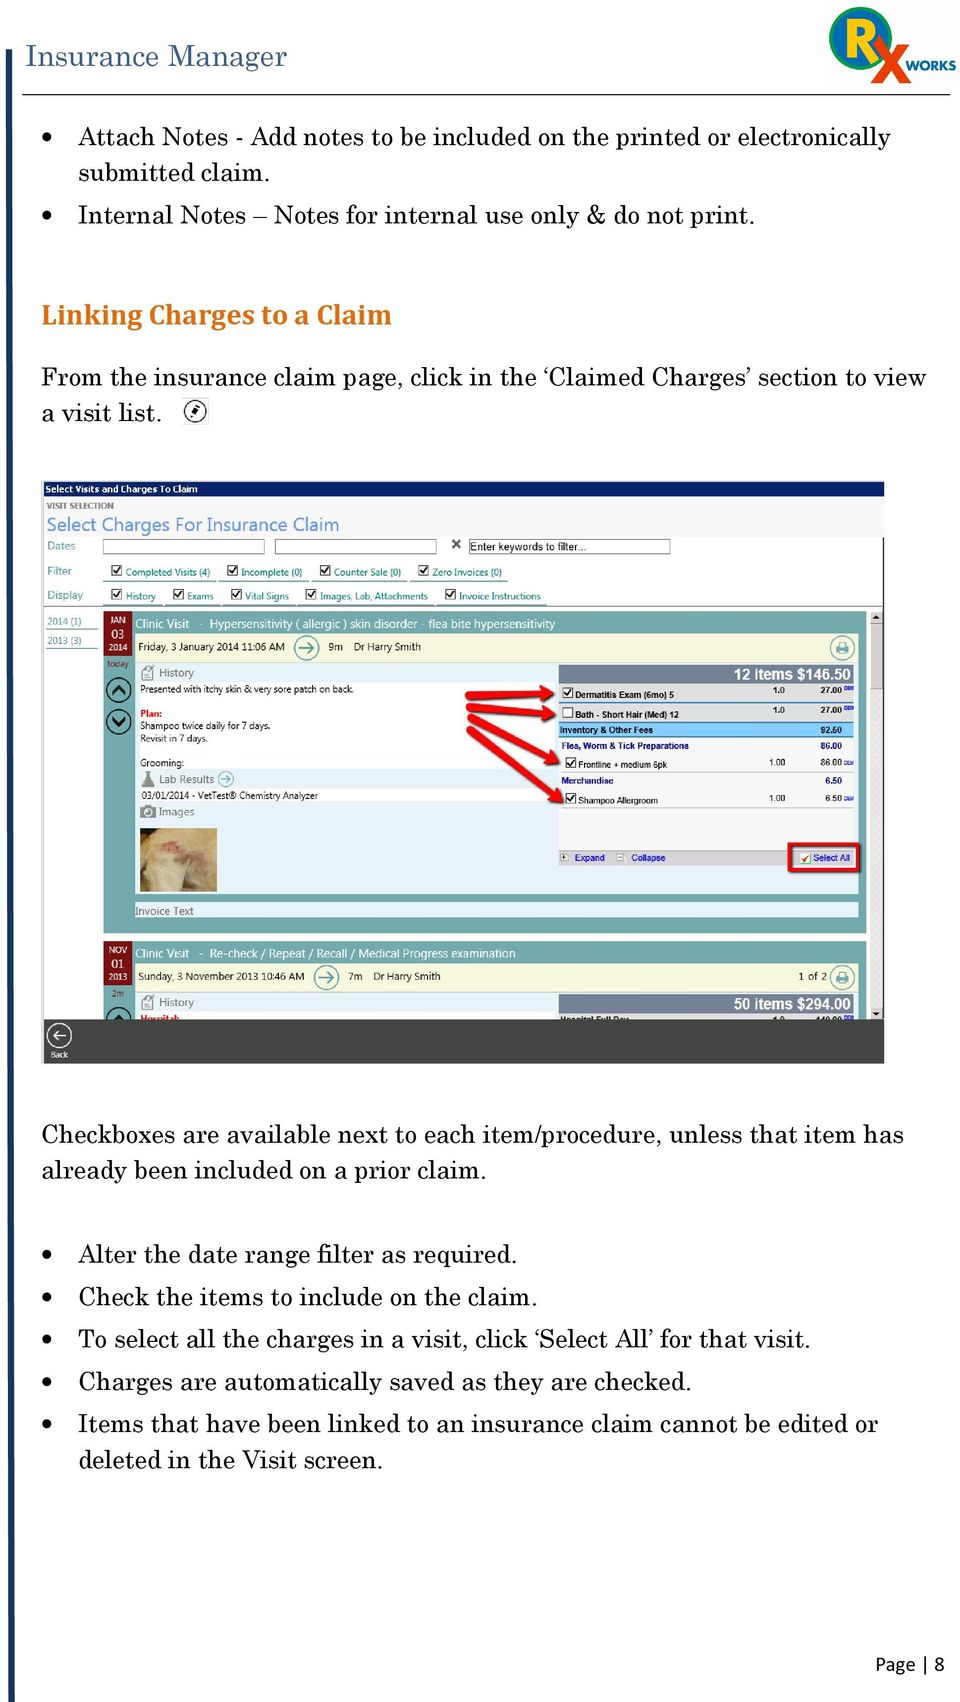 Checkboxes are available next to each item/procedure, unless that item has already been included on a prior claim. Alter the date range filter as required.